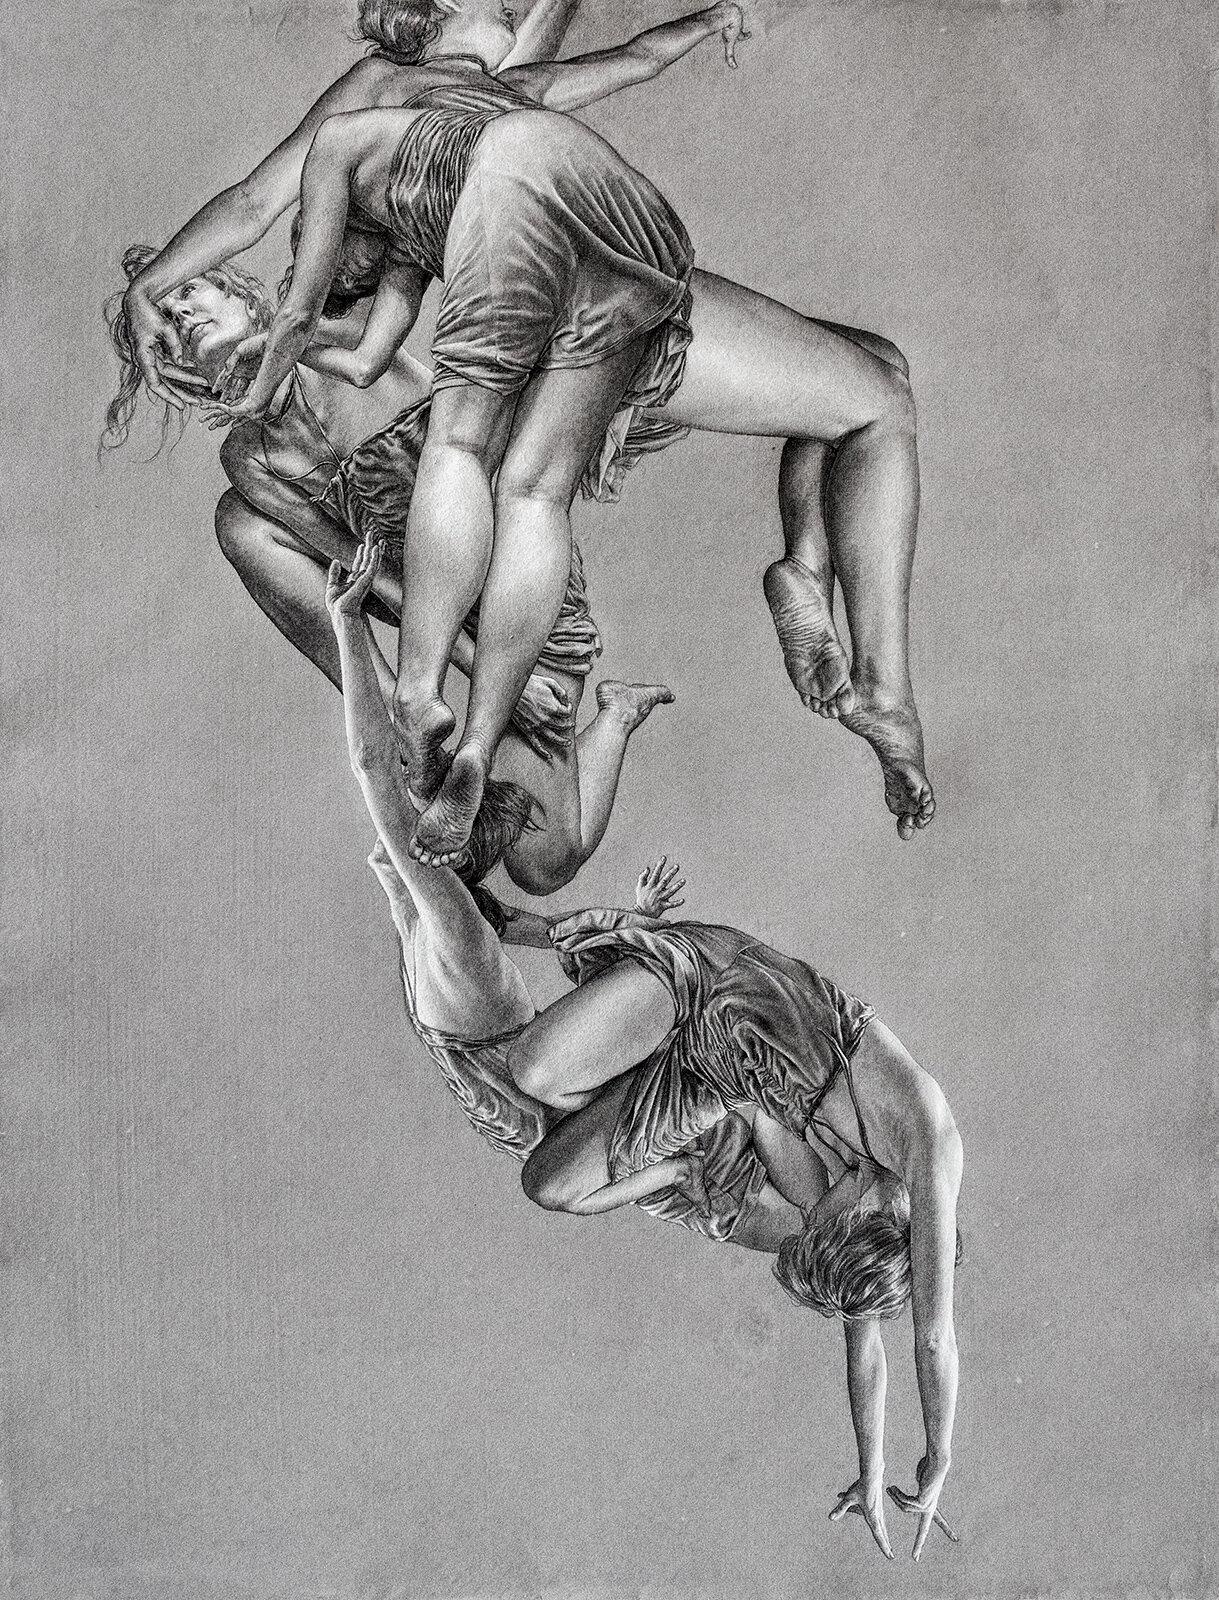 SALACIA - 26 X 20 INCHES | GRAPHITE, INK AND CHALK ON HANDMADE PAPER | 2012